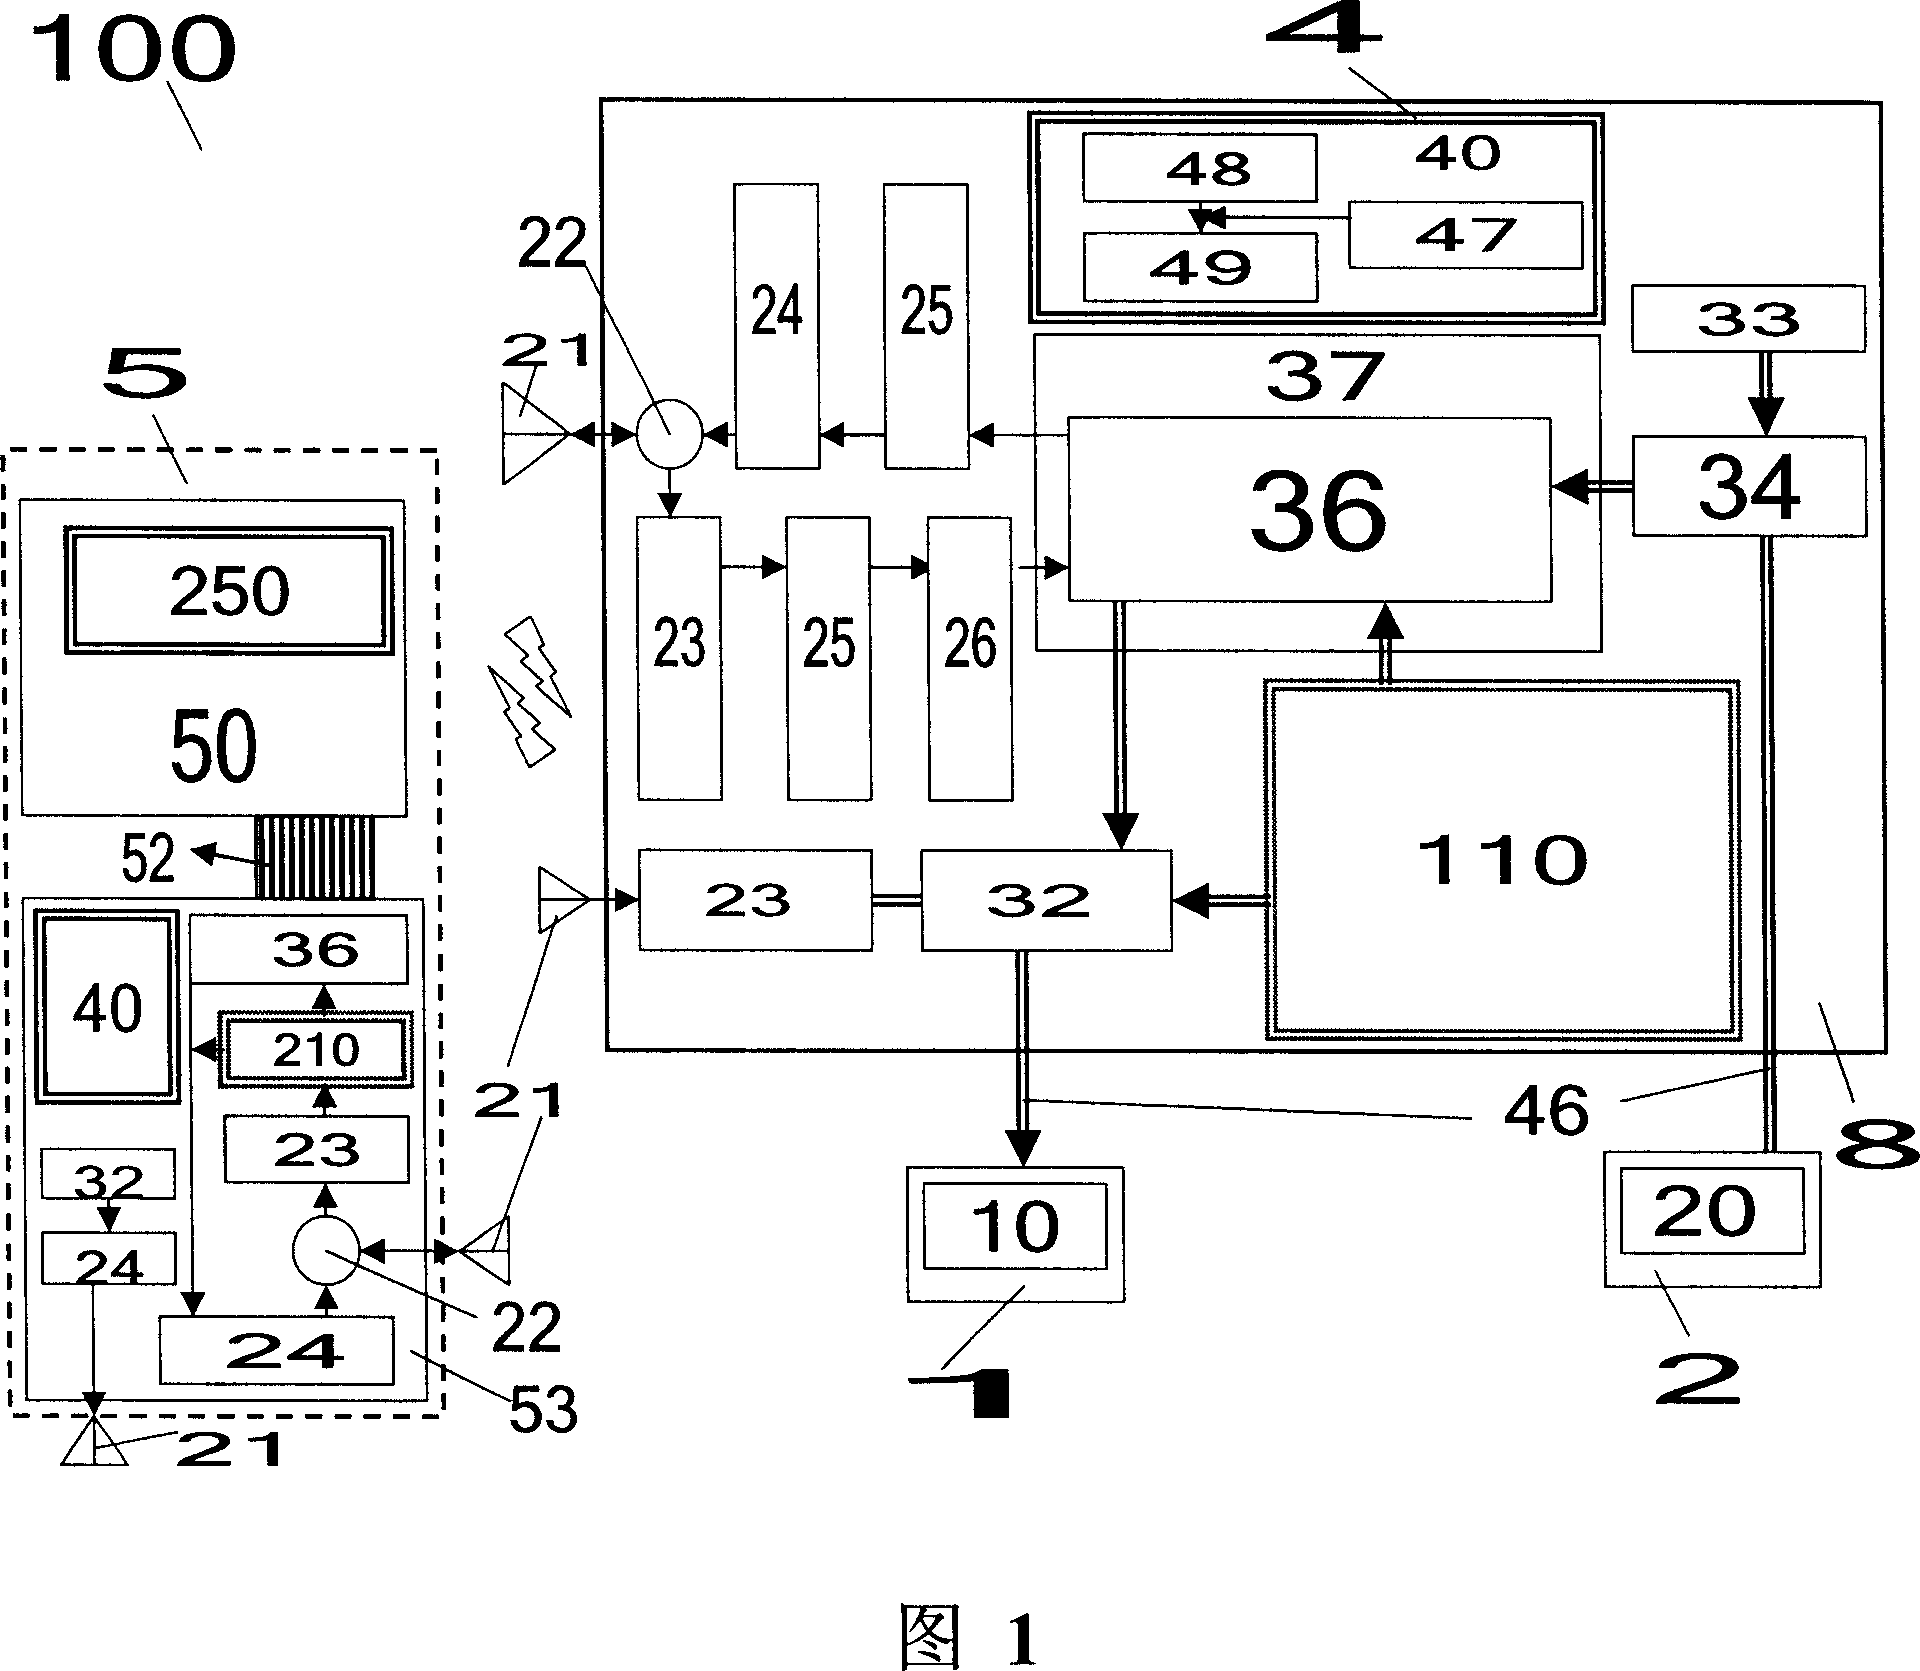 Nasal bone conduction video and audio transmission device